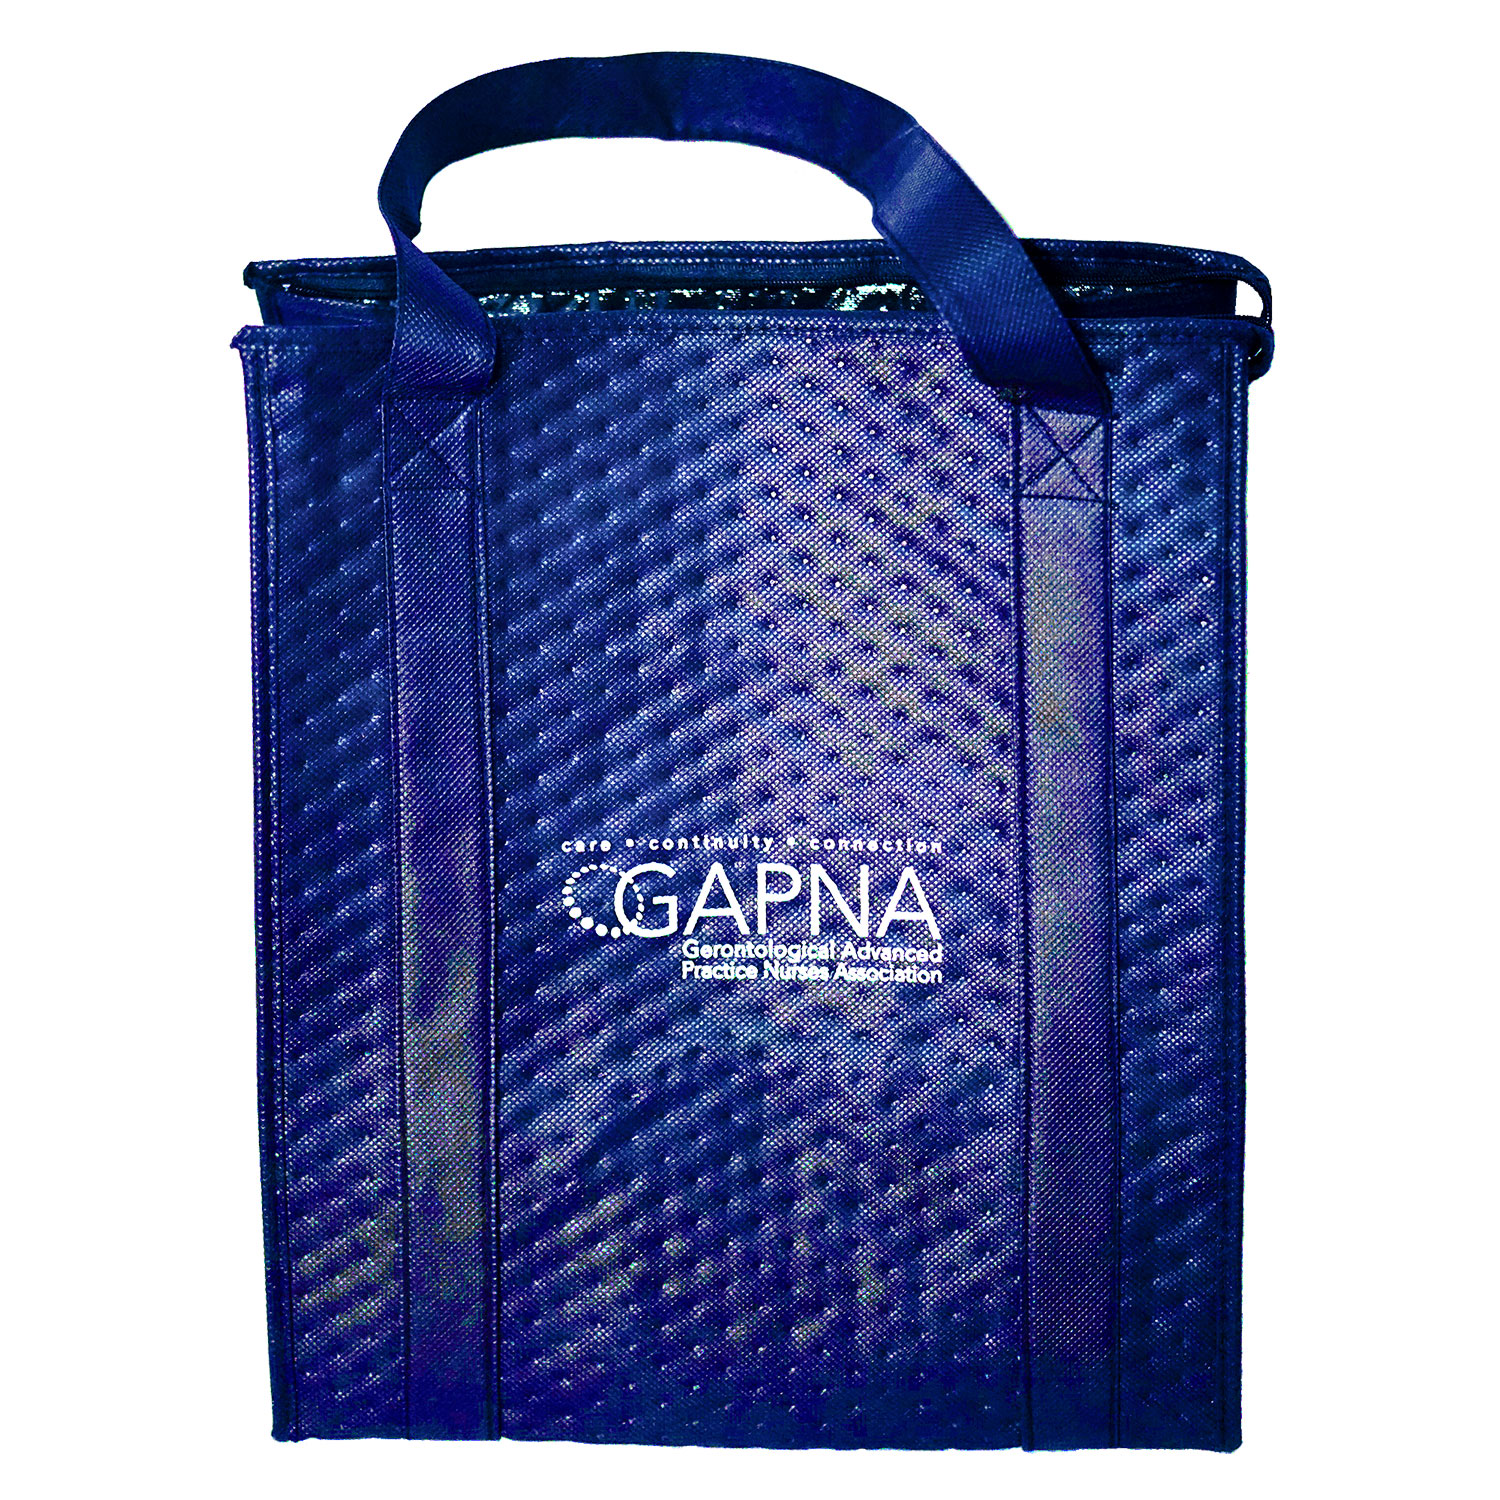 GAPNA Therm-O-Tote (case of 50 bags)